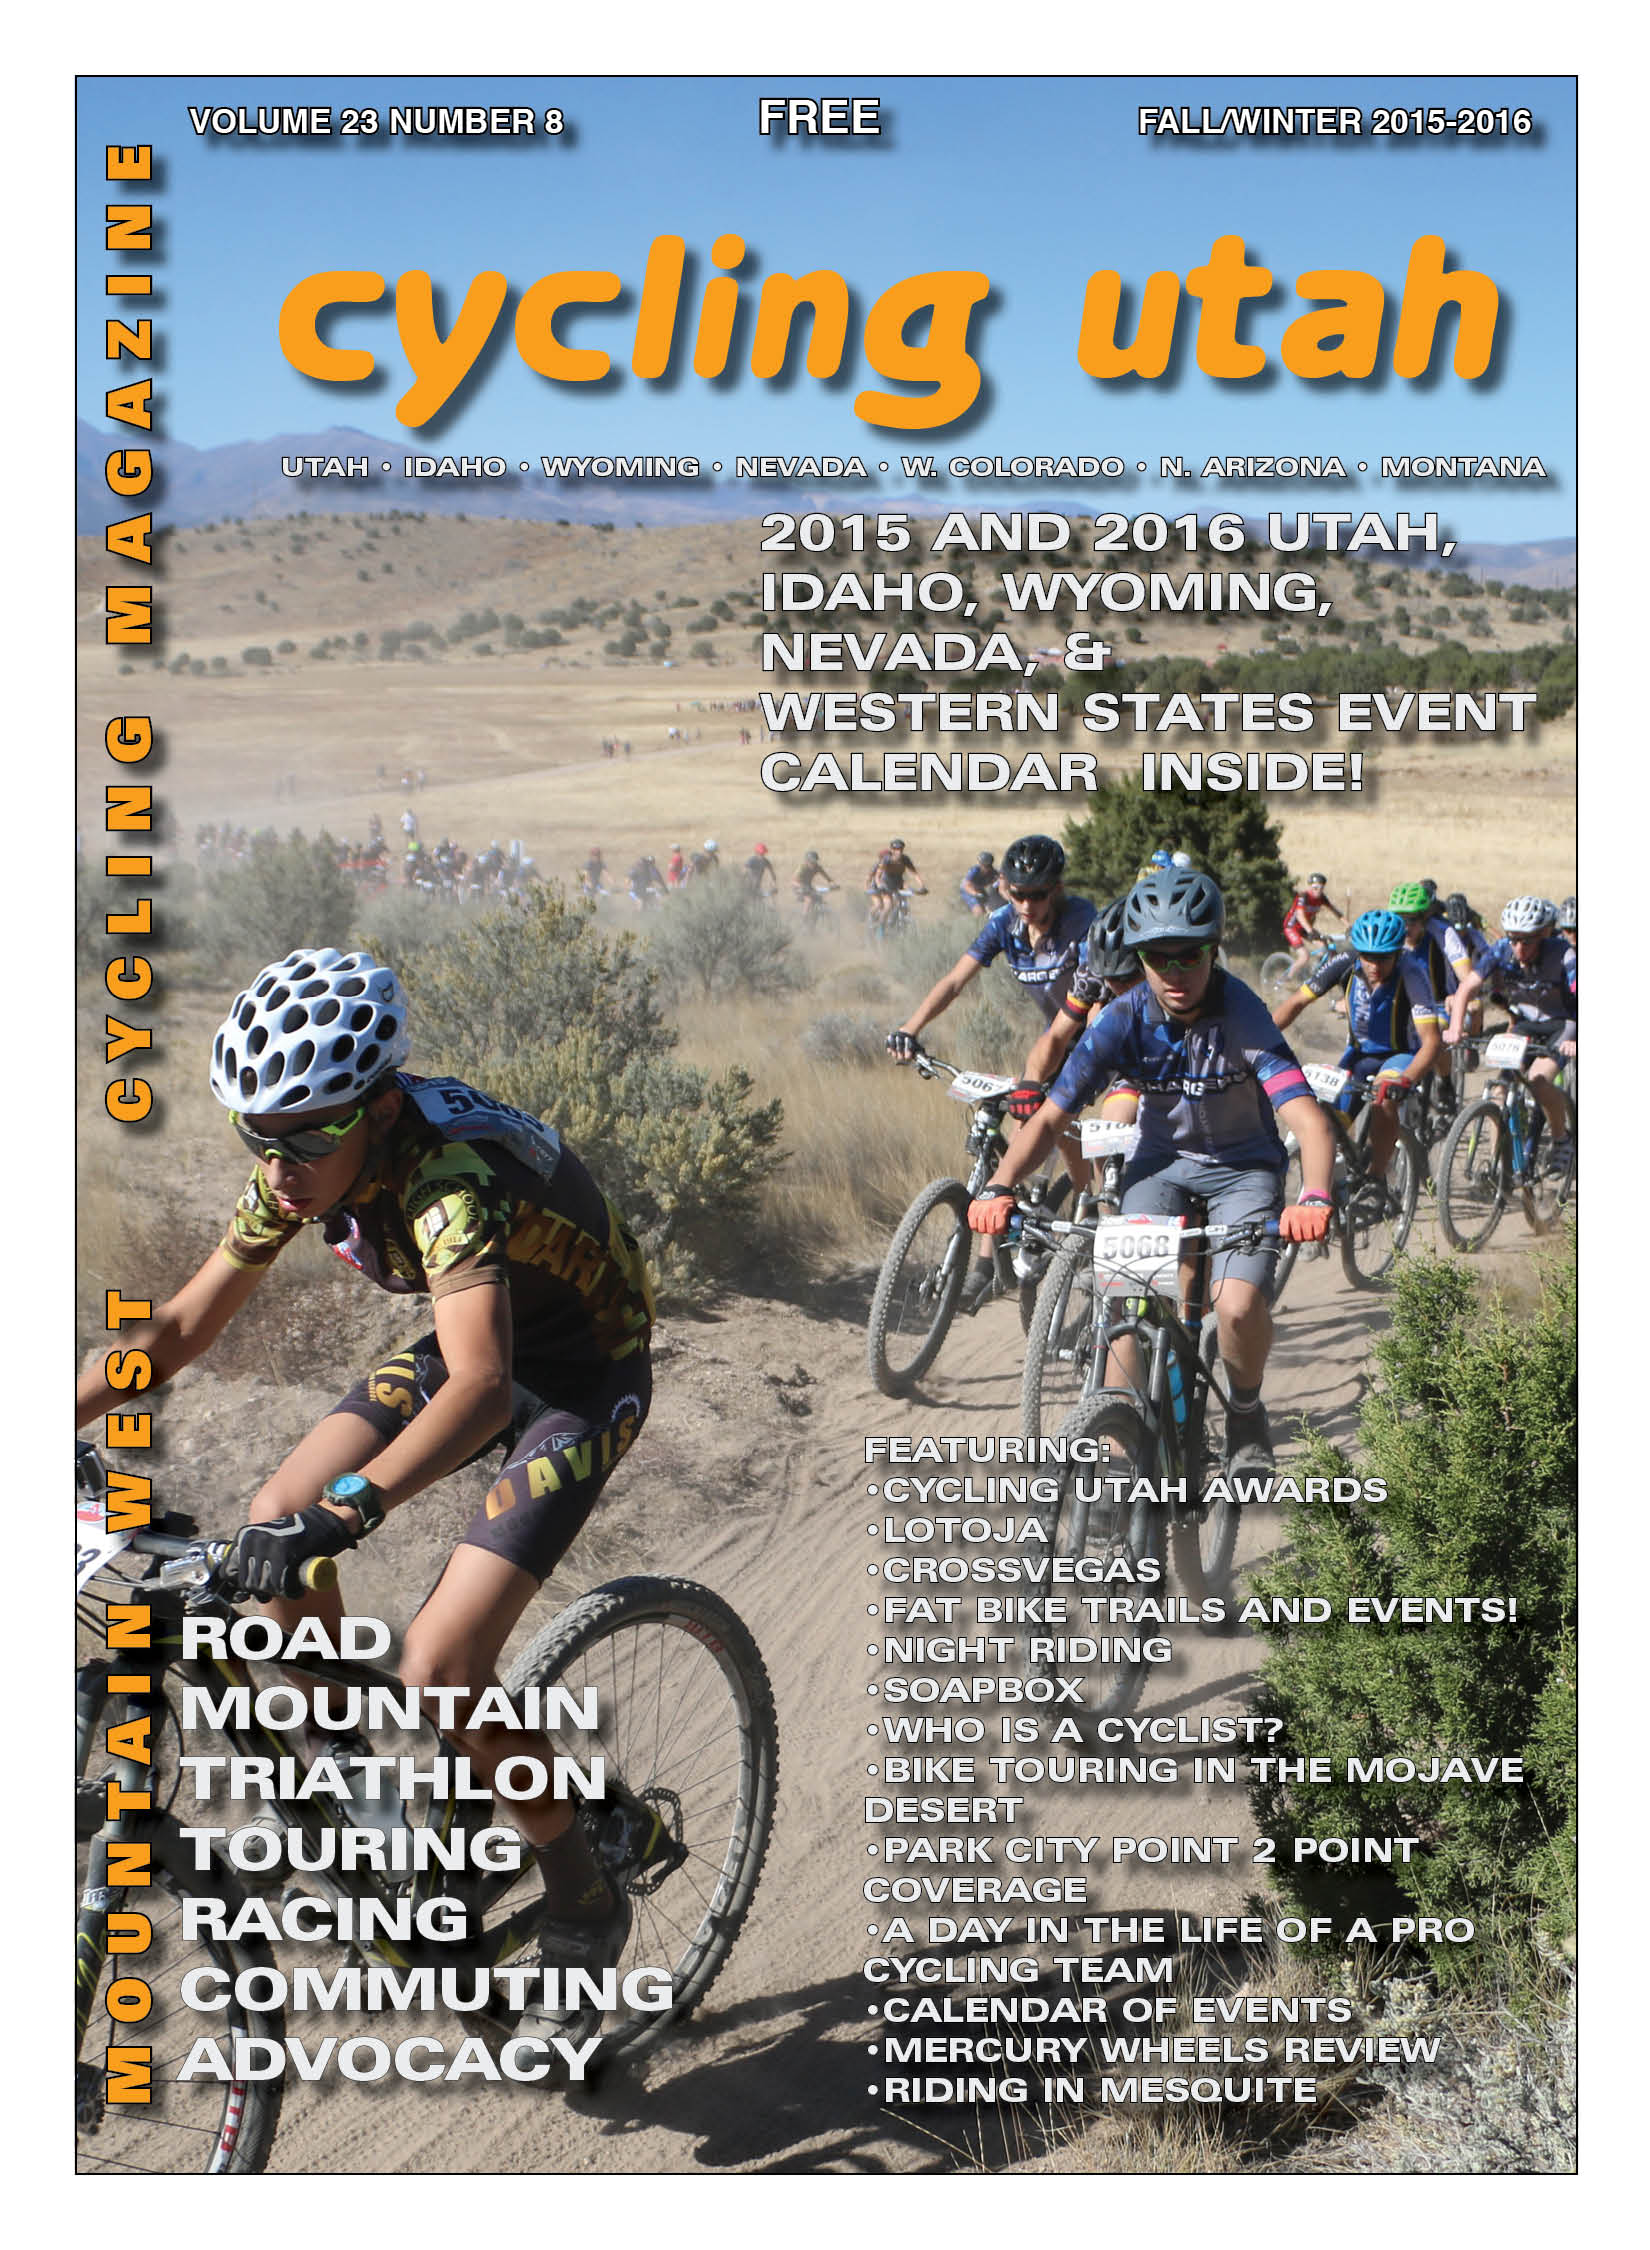 Cycling Utah’s Fall-Winter 2015-2016 Issue is Now Available!